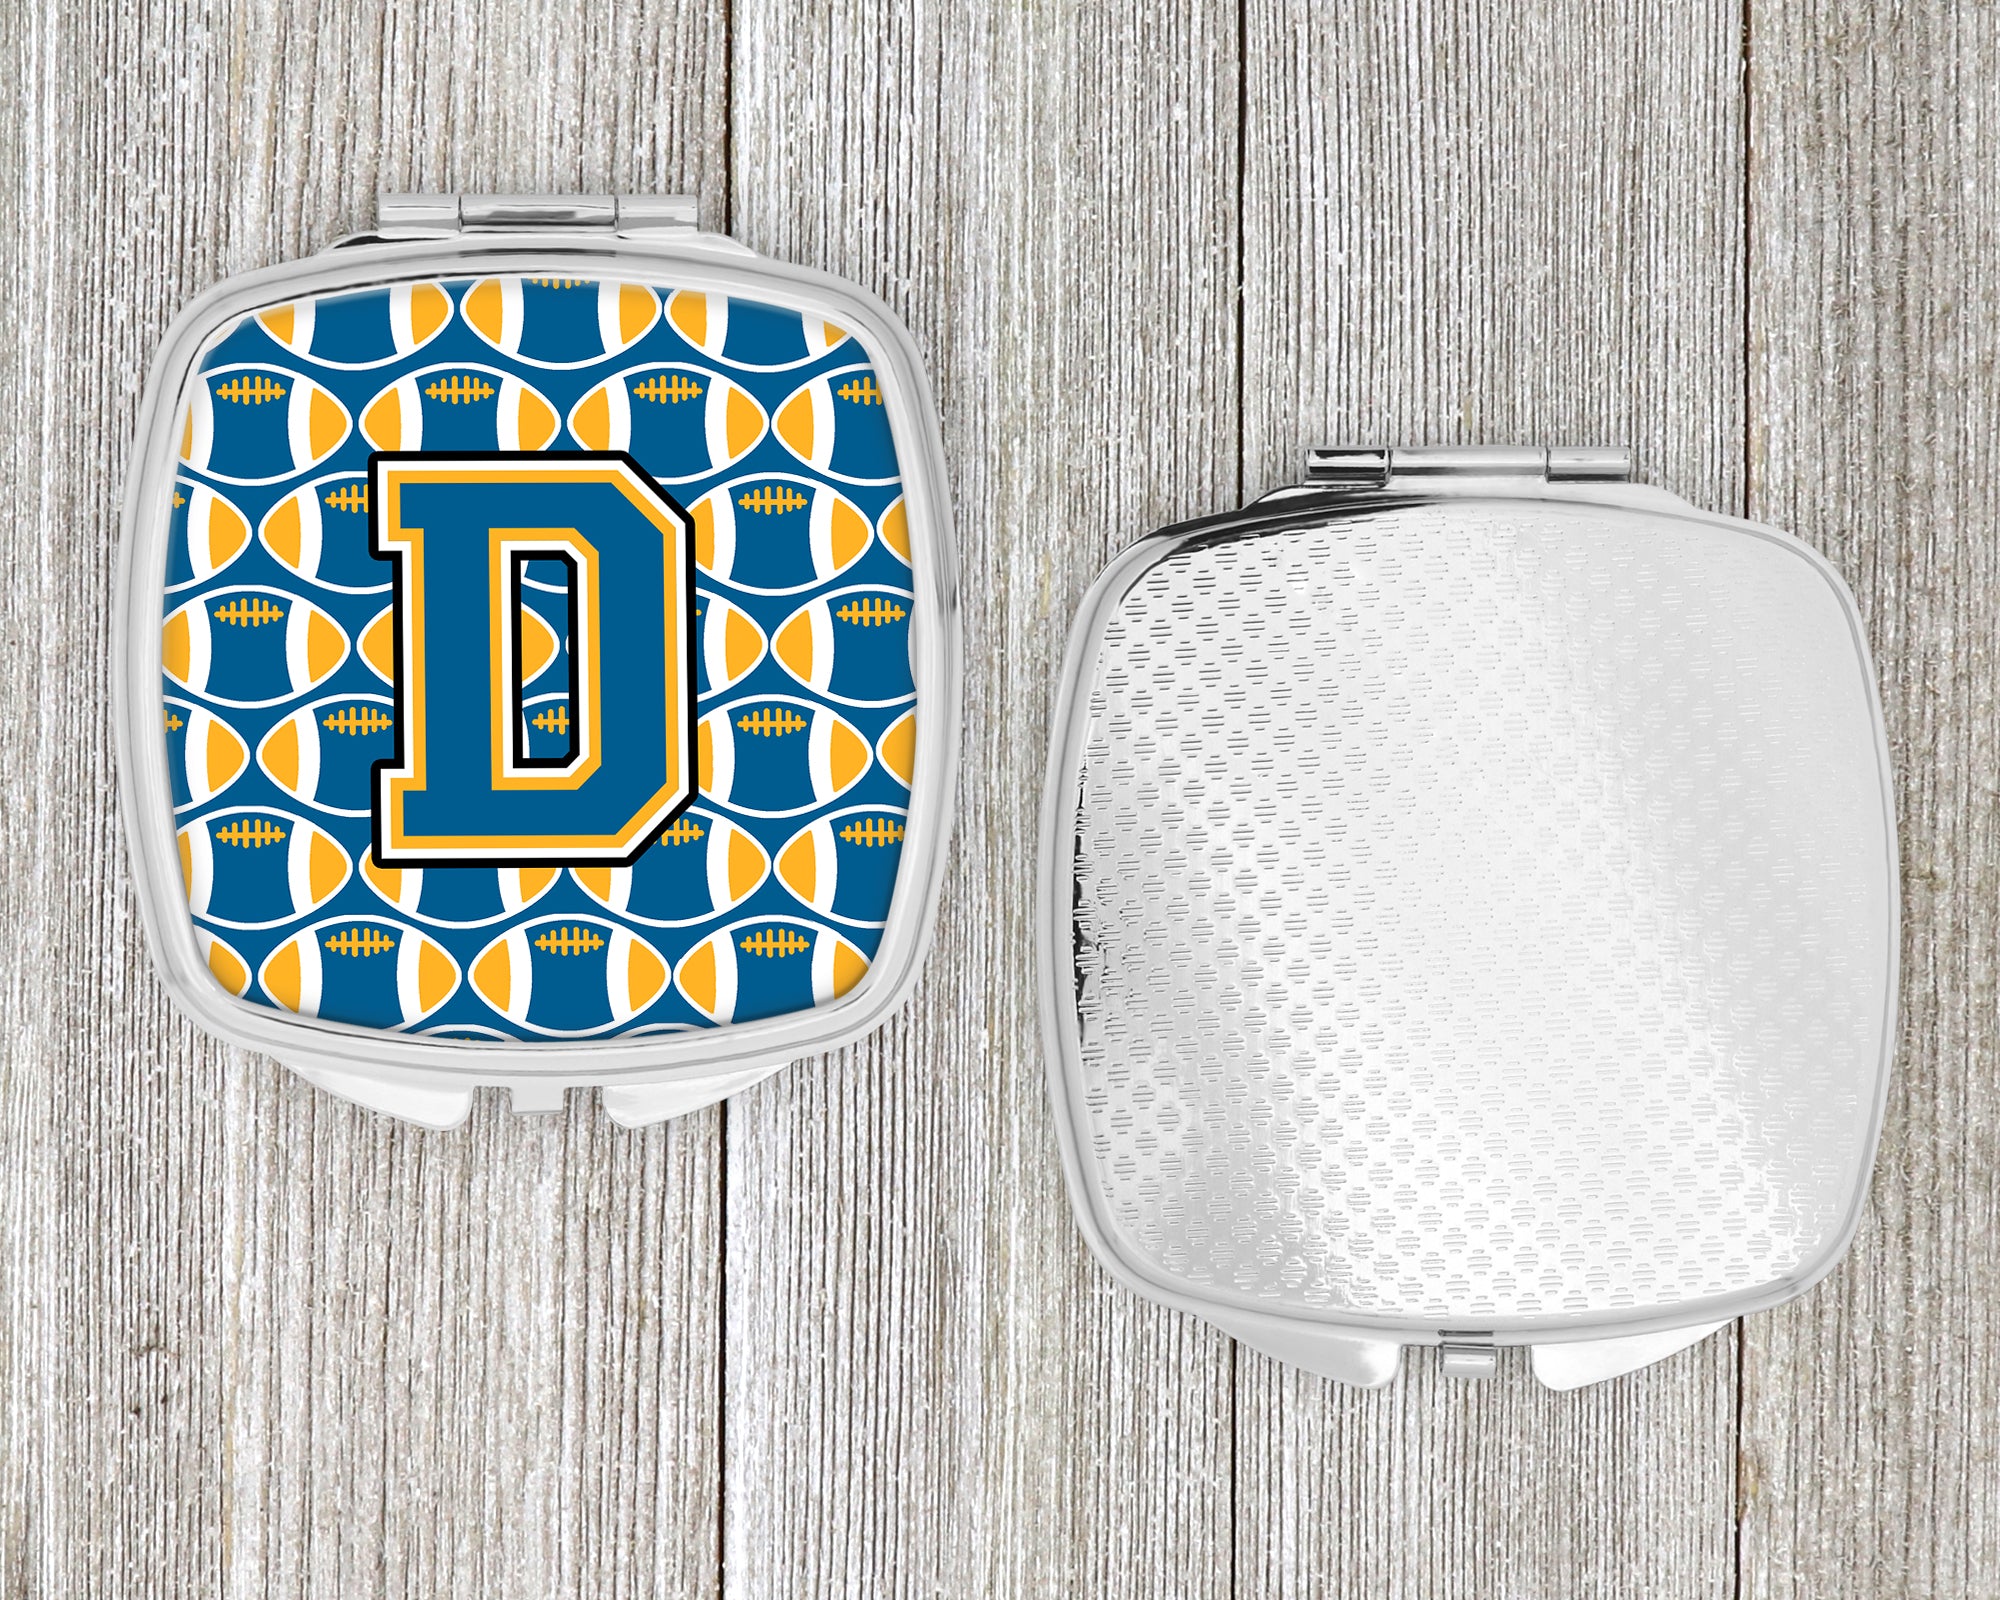 Letter D Football Blue and Gold Compact Mirror CJ1077-DSCM  the-store.com.